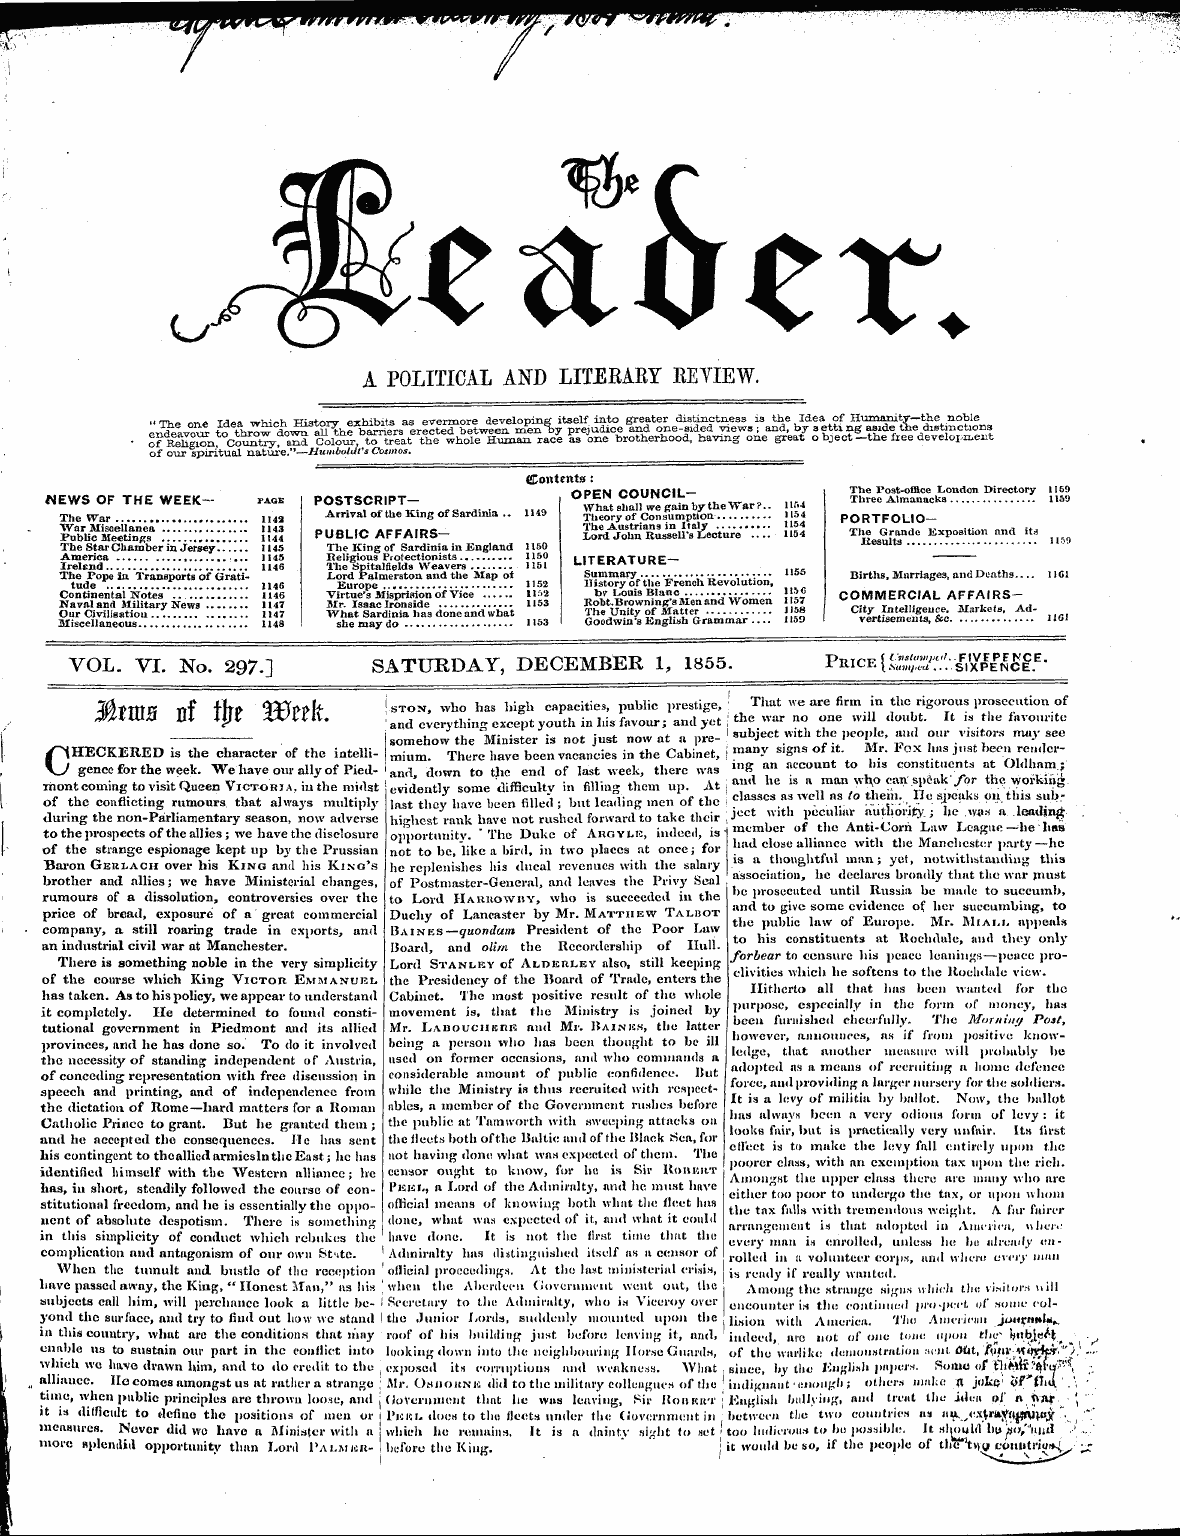 Leader (1850-1860): jS F Y, 1st edition - Contents: